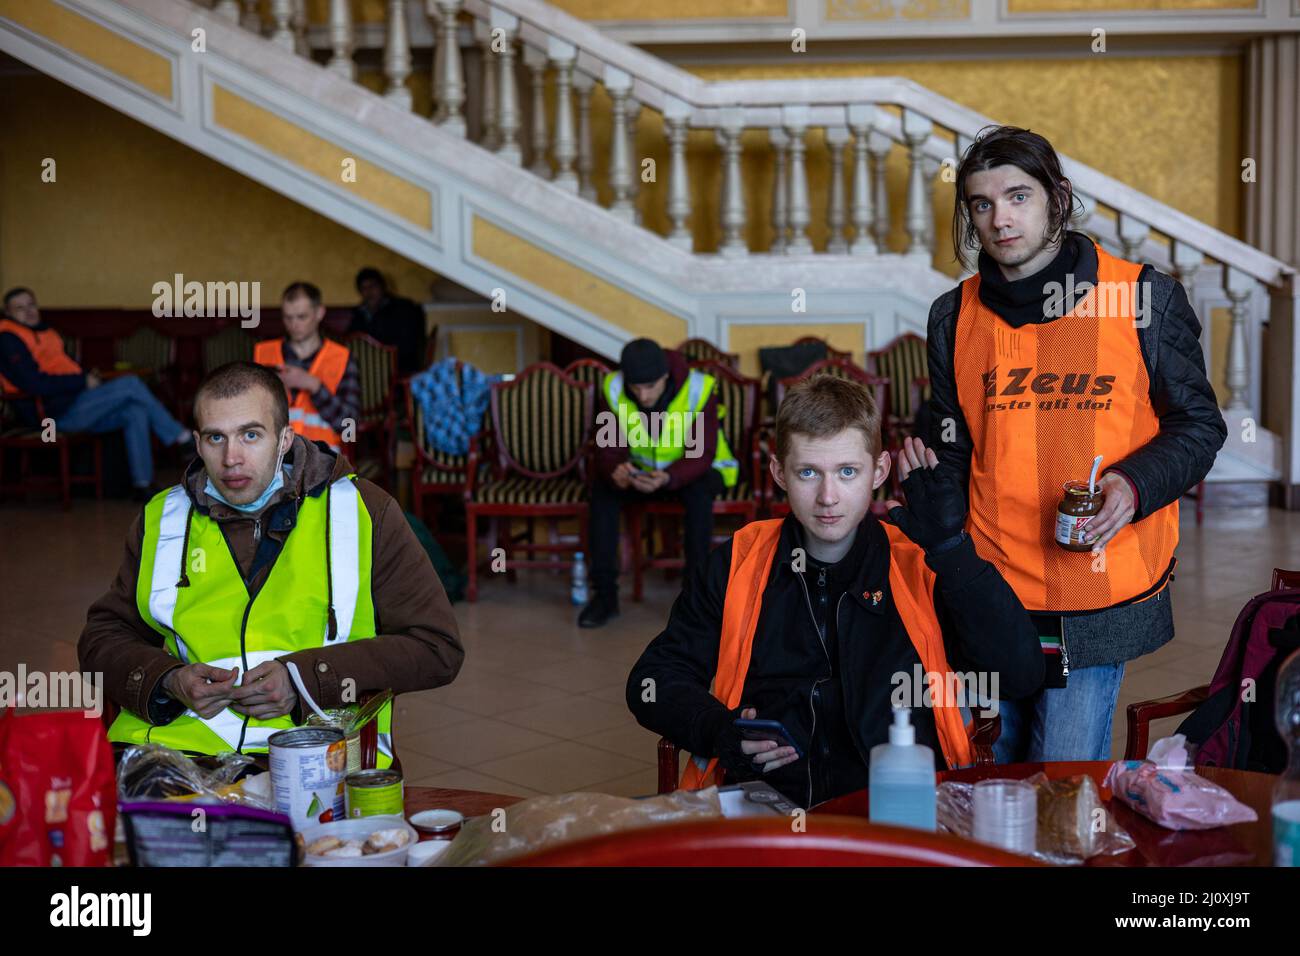 LVIV, UKRAINE -March 14, 2022: Humanitarian crisis during the war in Ukraine. Volunteers have a rest in the volunteer center at Lviv Railway Station. Stock Photo